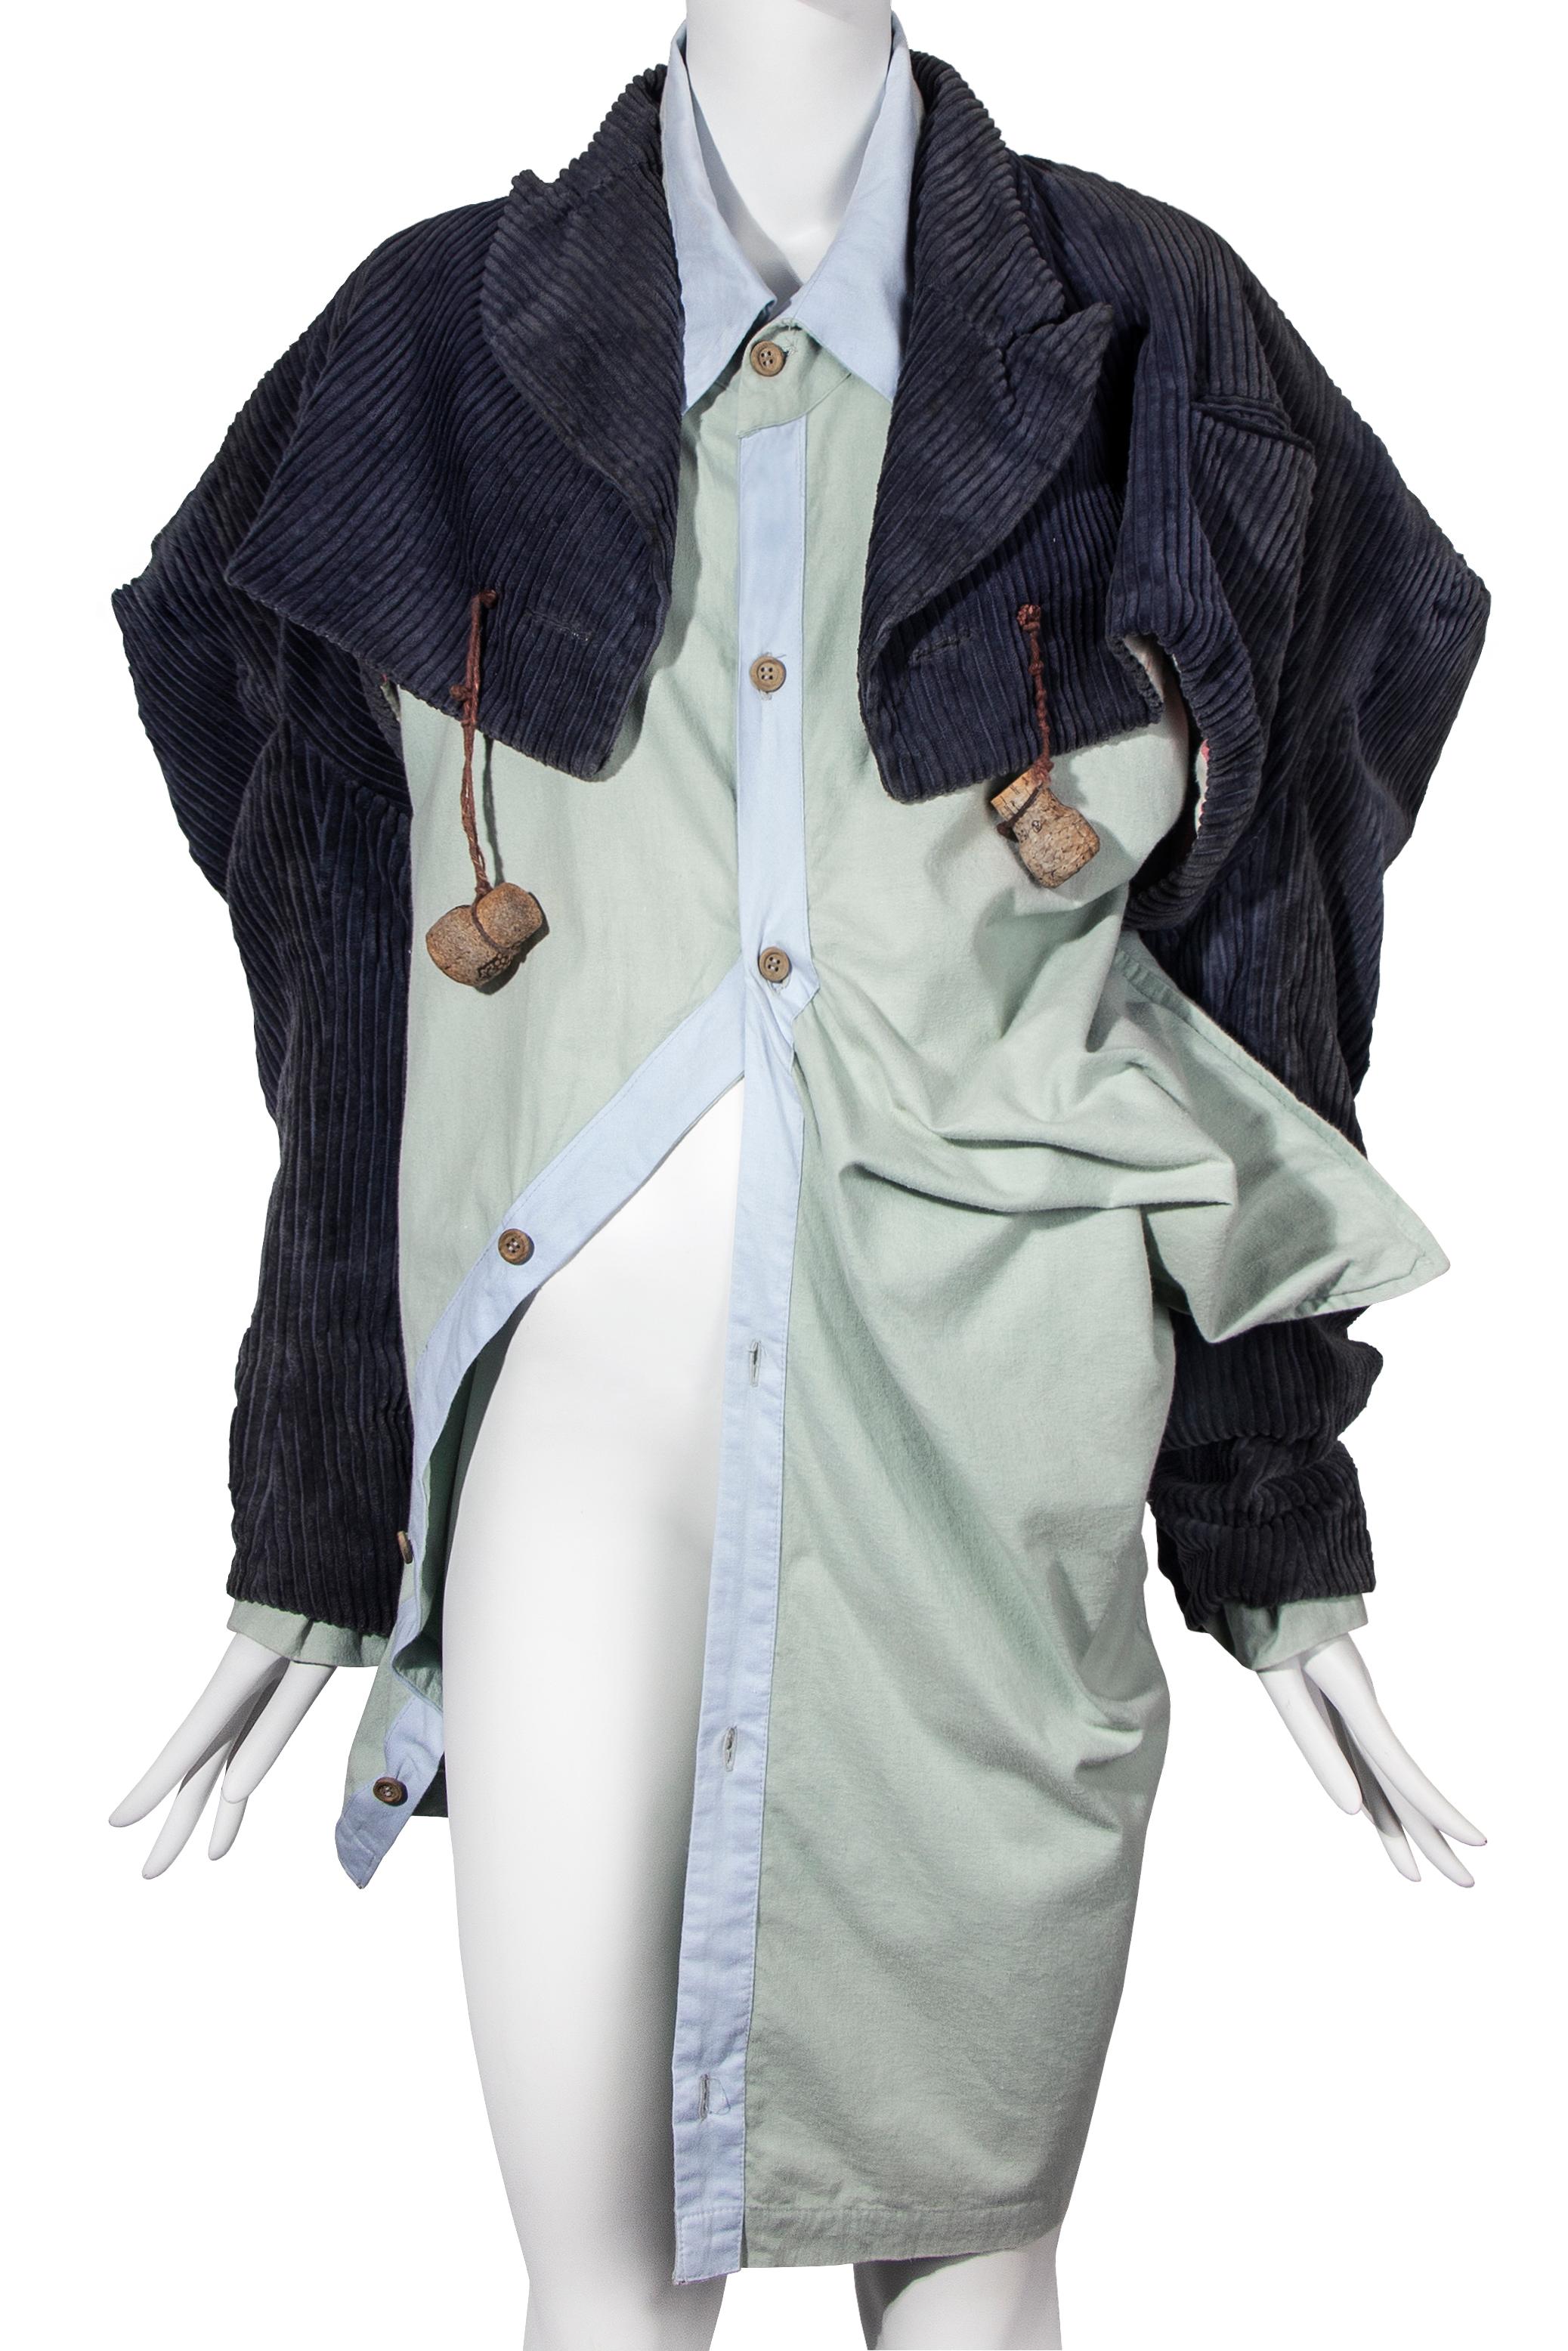 John Galliano 'The Ludic Games' spencer jacket & oversized shirt pair, fw 1985 For Sale 11